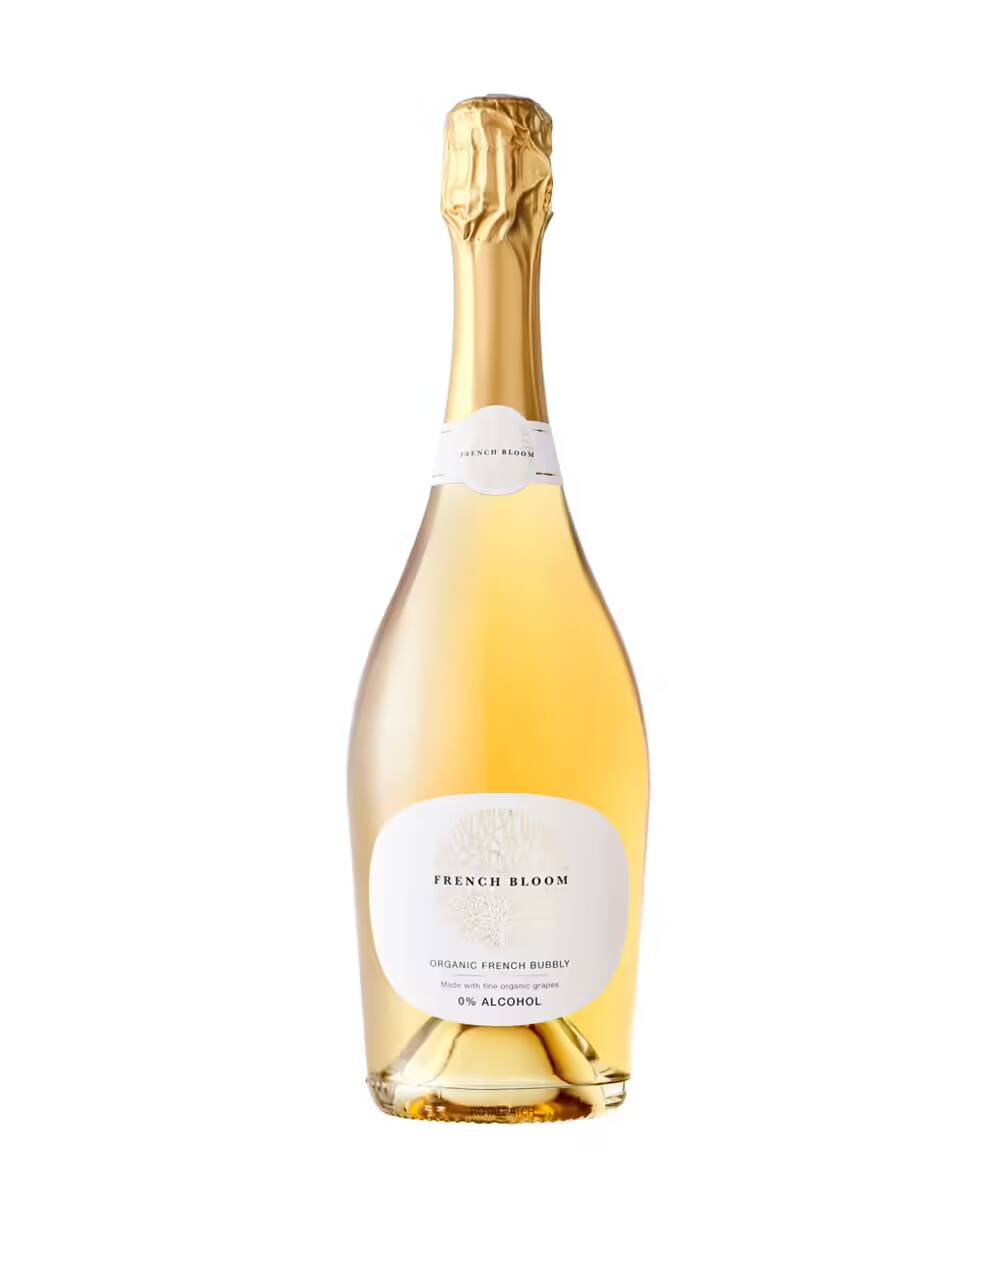 French Bloom Le Blanc Organic French Bubbly Sparkling Wine